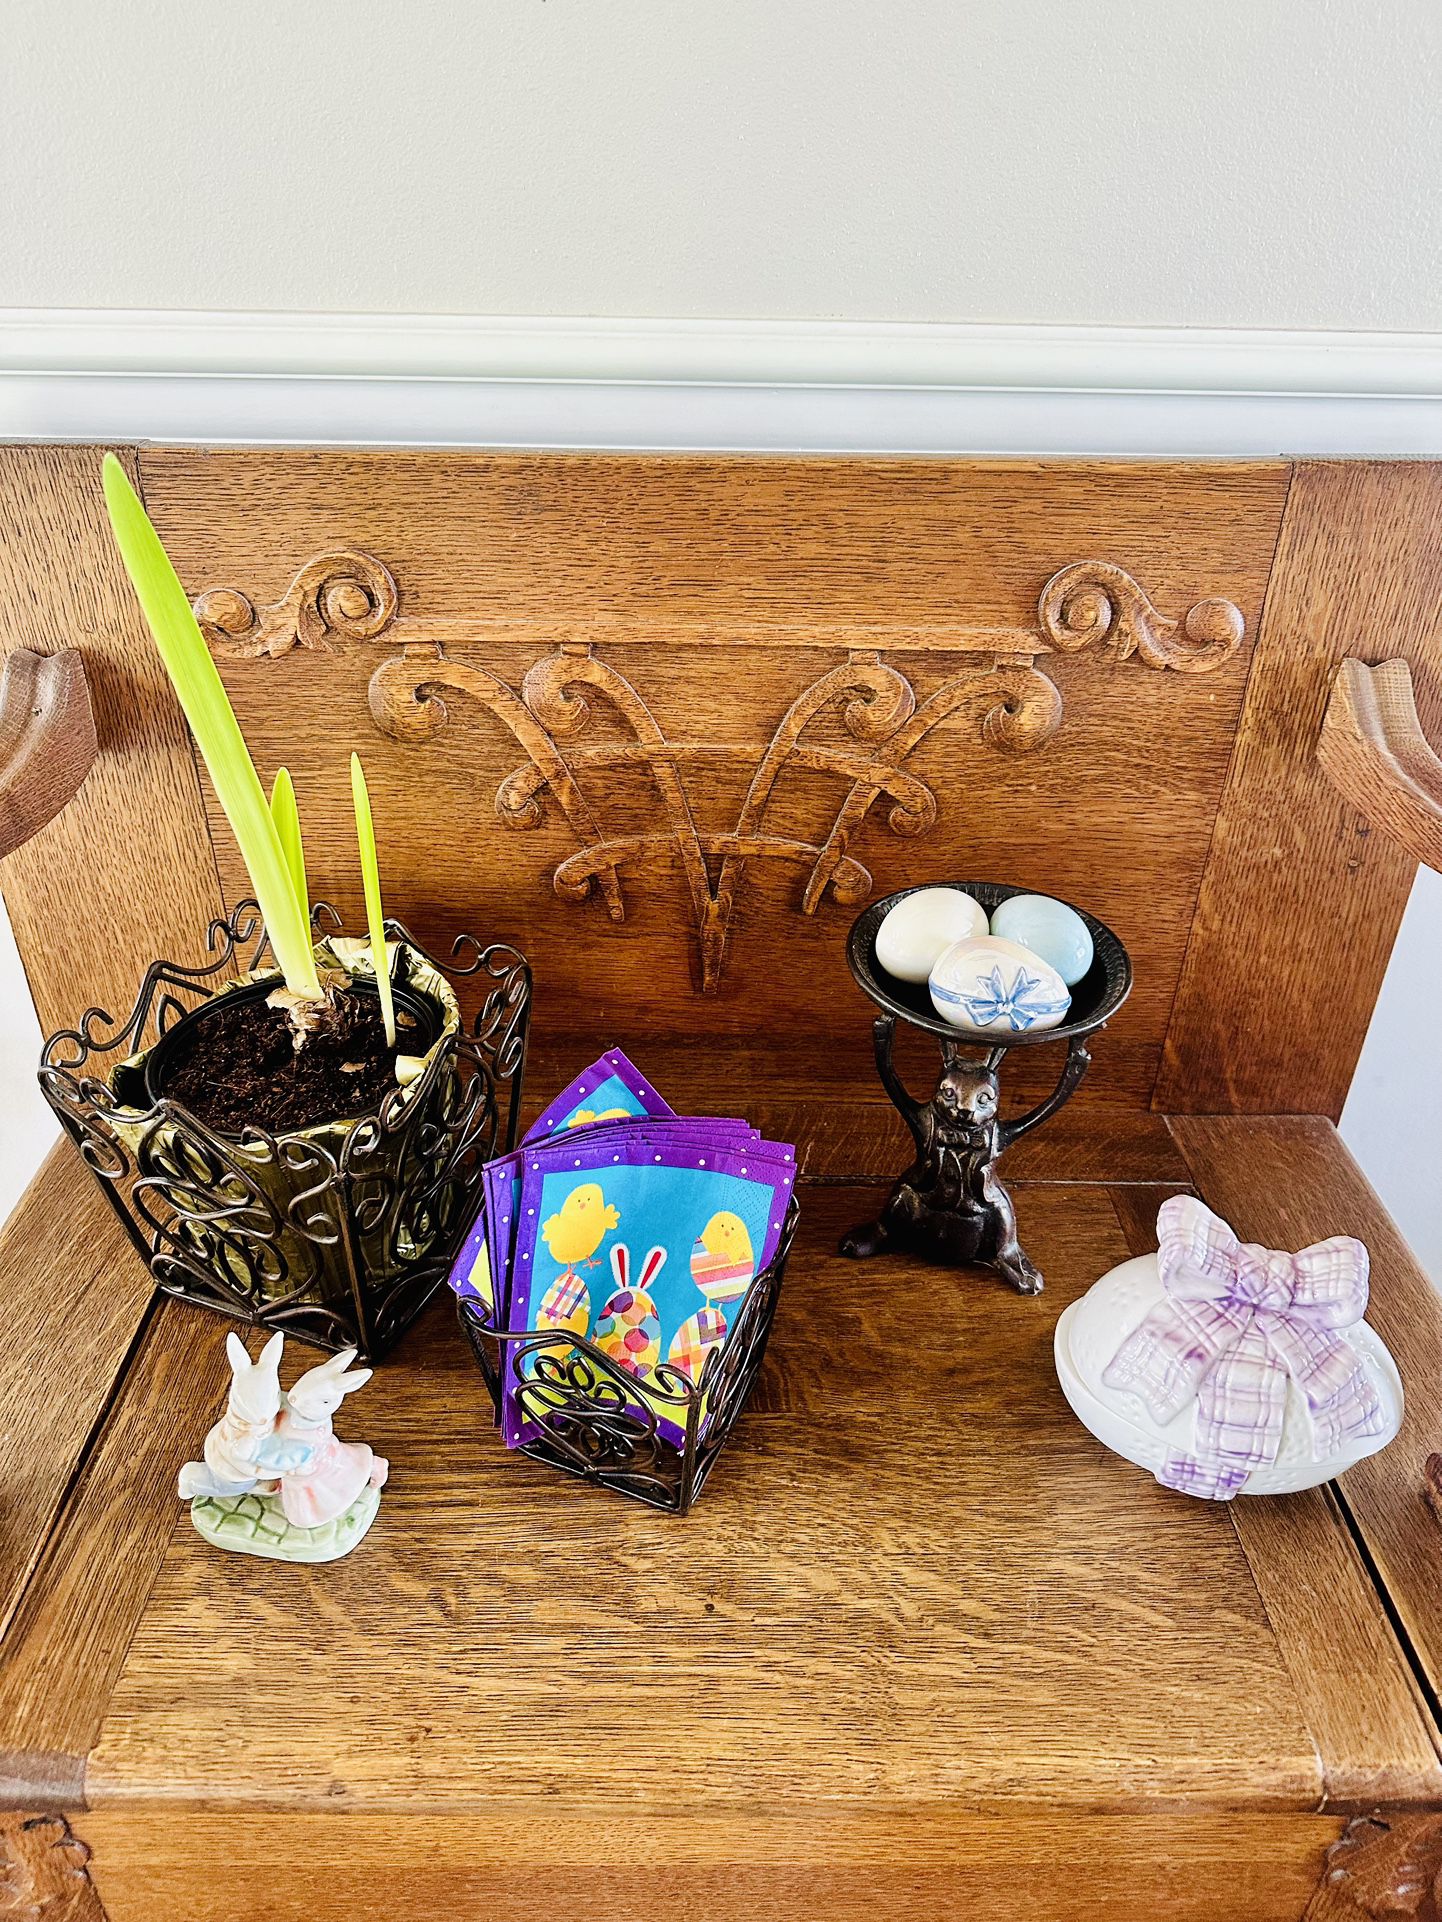 Easter Decor ~ 2 Southern Living at Home Rosedale Plant Holders, Amaryllis Plant, Covered Ceramic Egg Dish, Dancing Bunnies, Bronze Bunny Stand & More